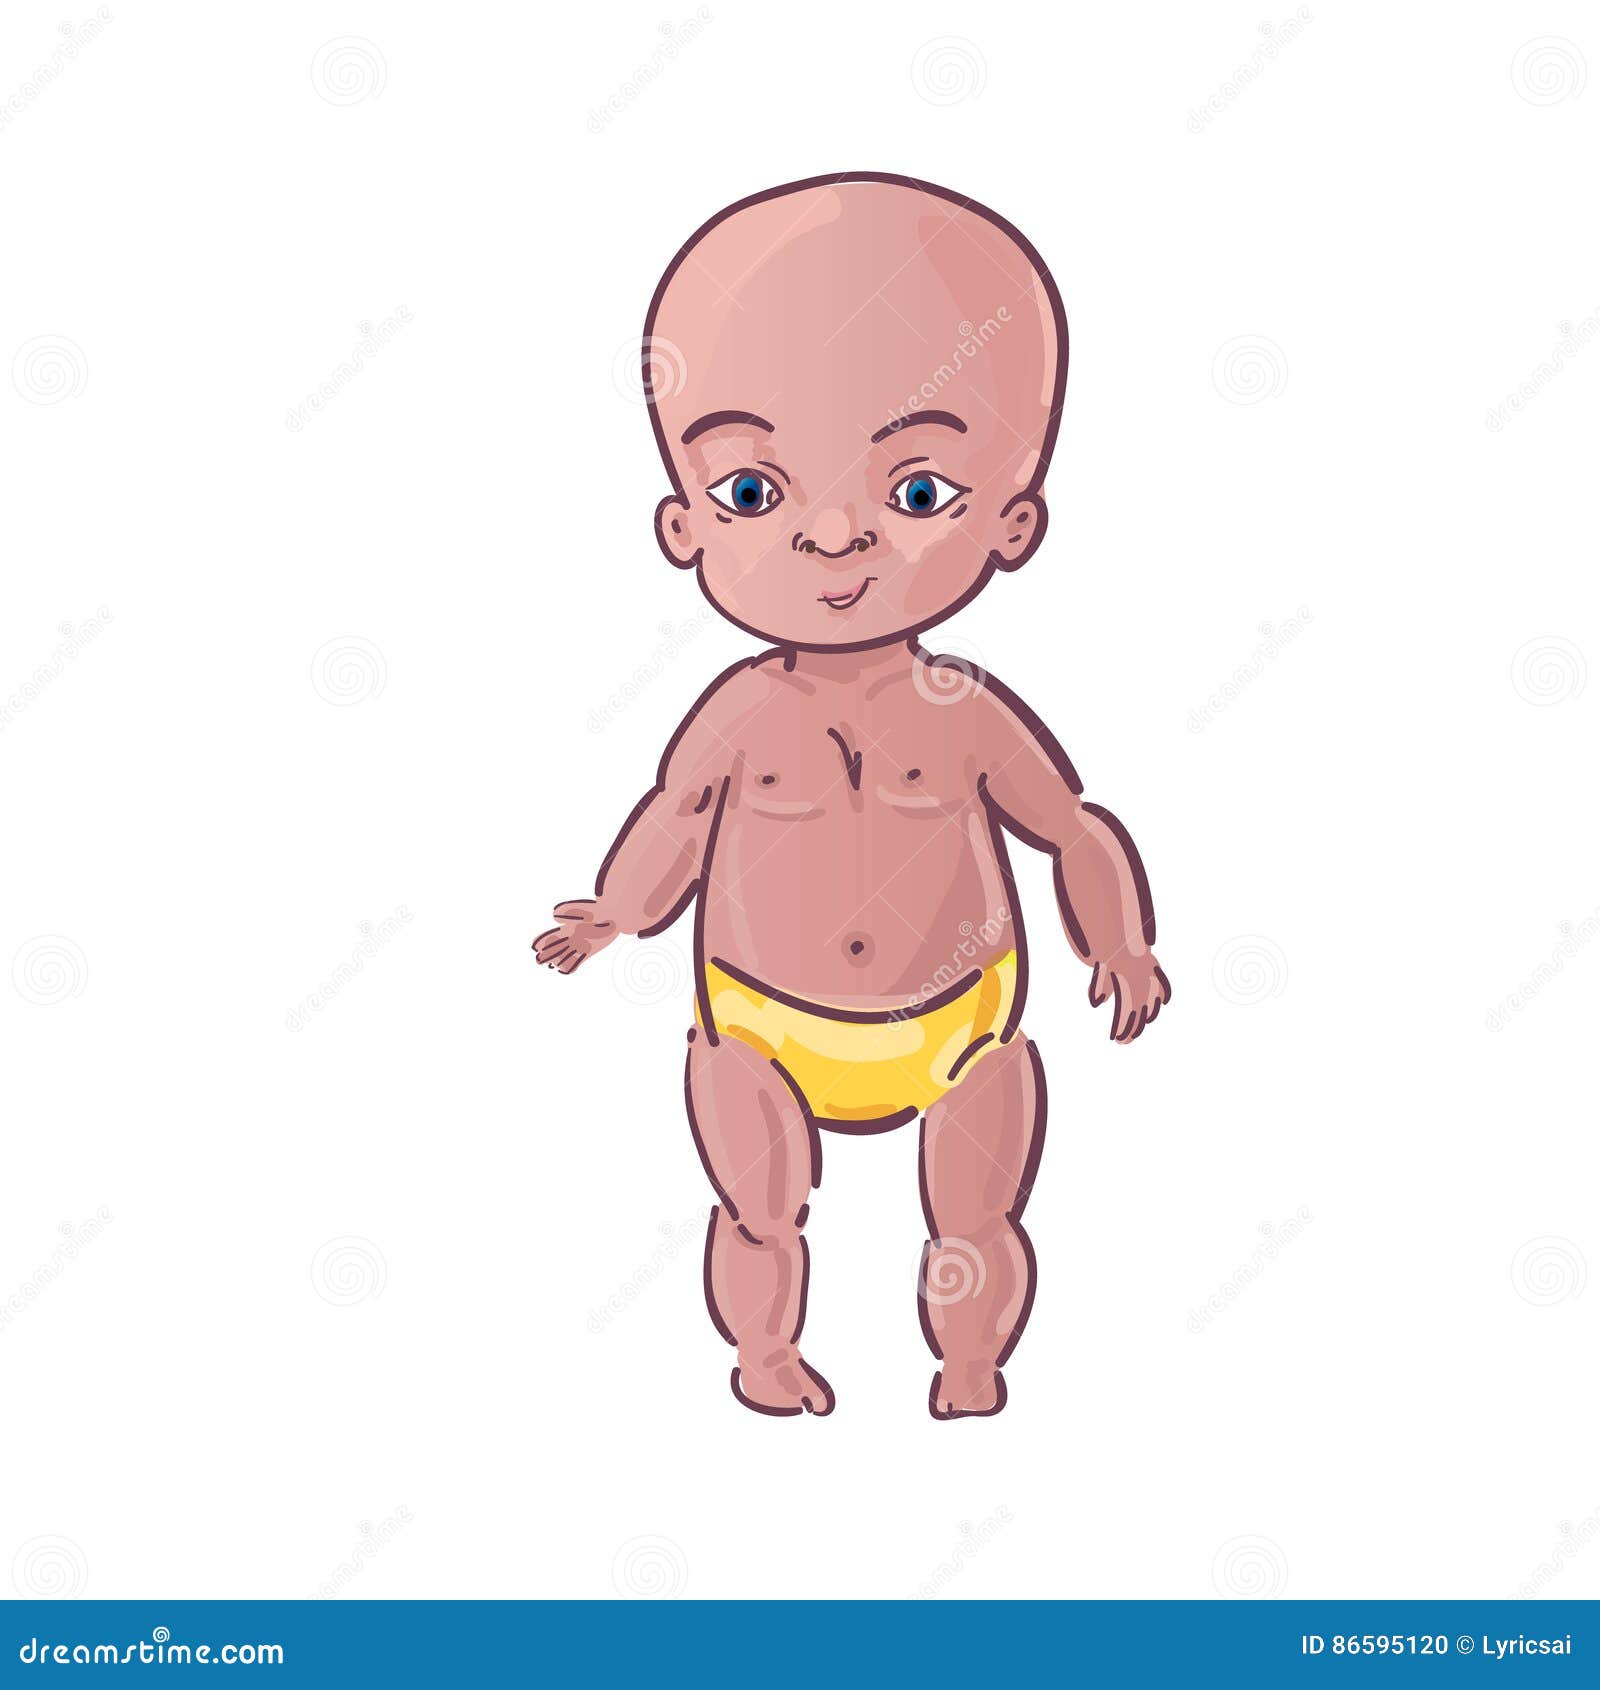 Cute baby standing, stock vector. Illustration of person - 86595120